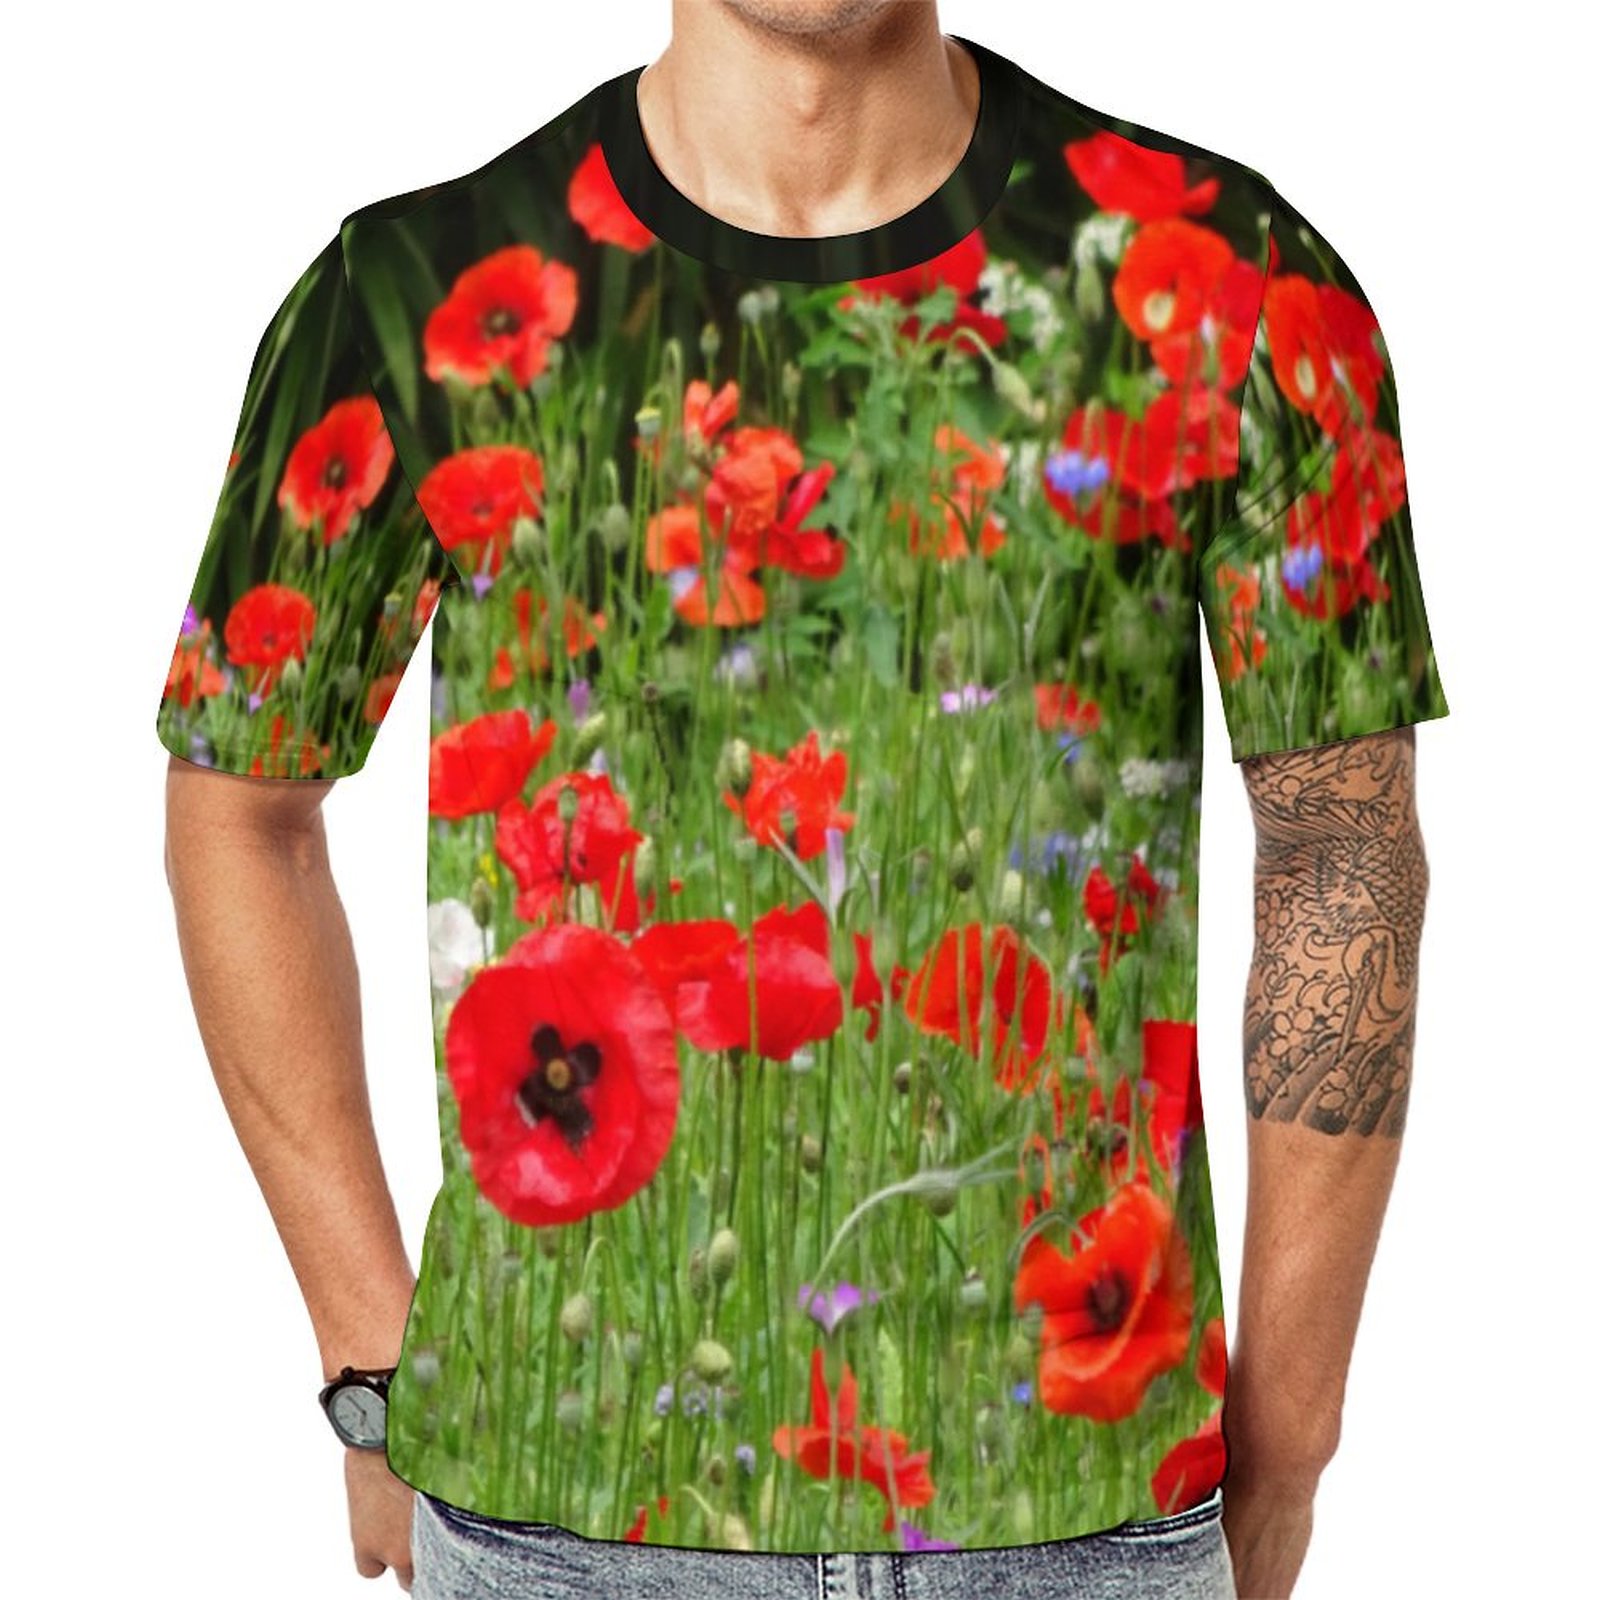 Red Poppies Field  Short Sleeve Print Unisex Tshirt Summer Casual Tees for Men and Women Coolcoshirts